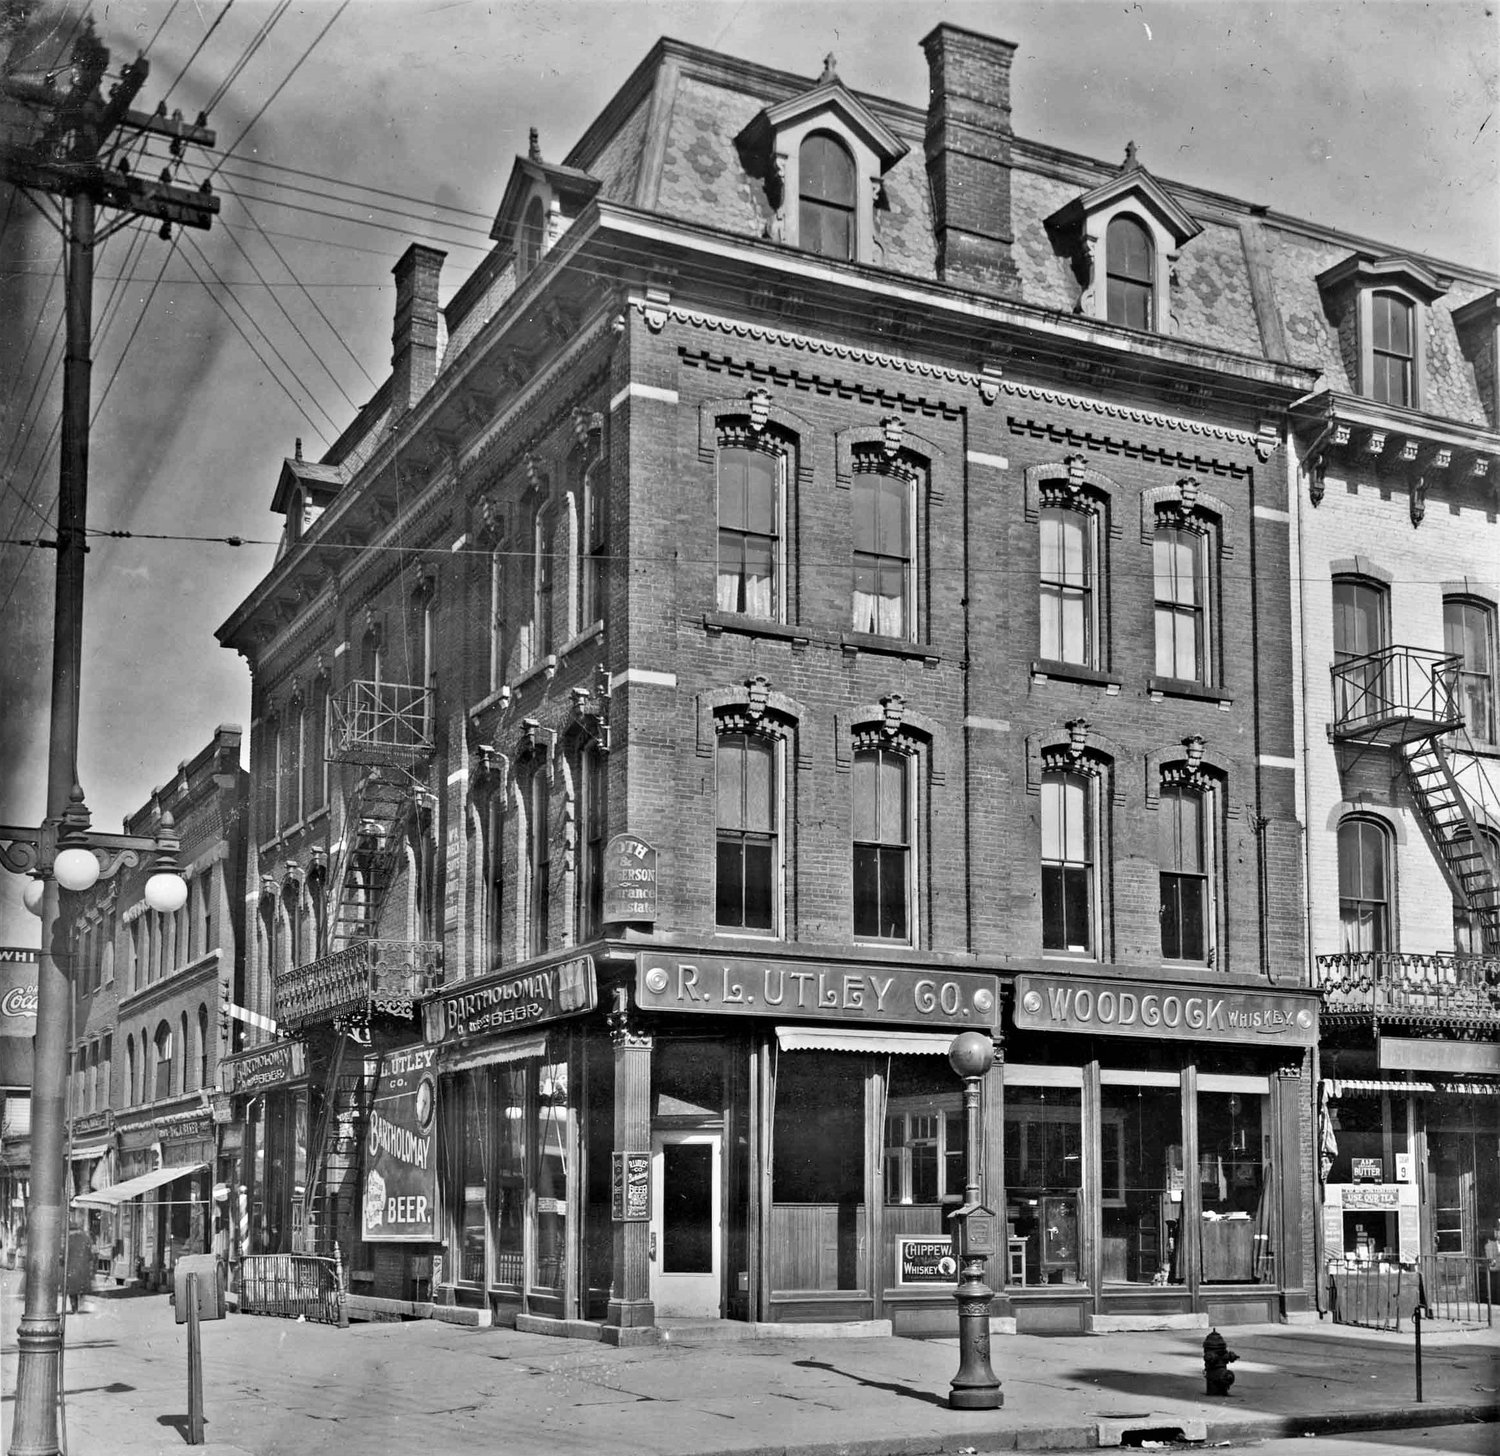 DOWNTOWN SHOP — The R.L. Utley Co., seen in this undated photo, was once located on the northwest corner of Dominick and Washington streets.